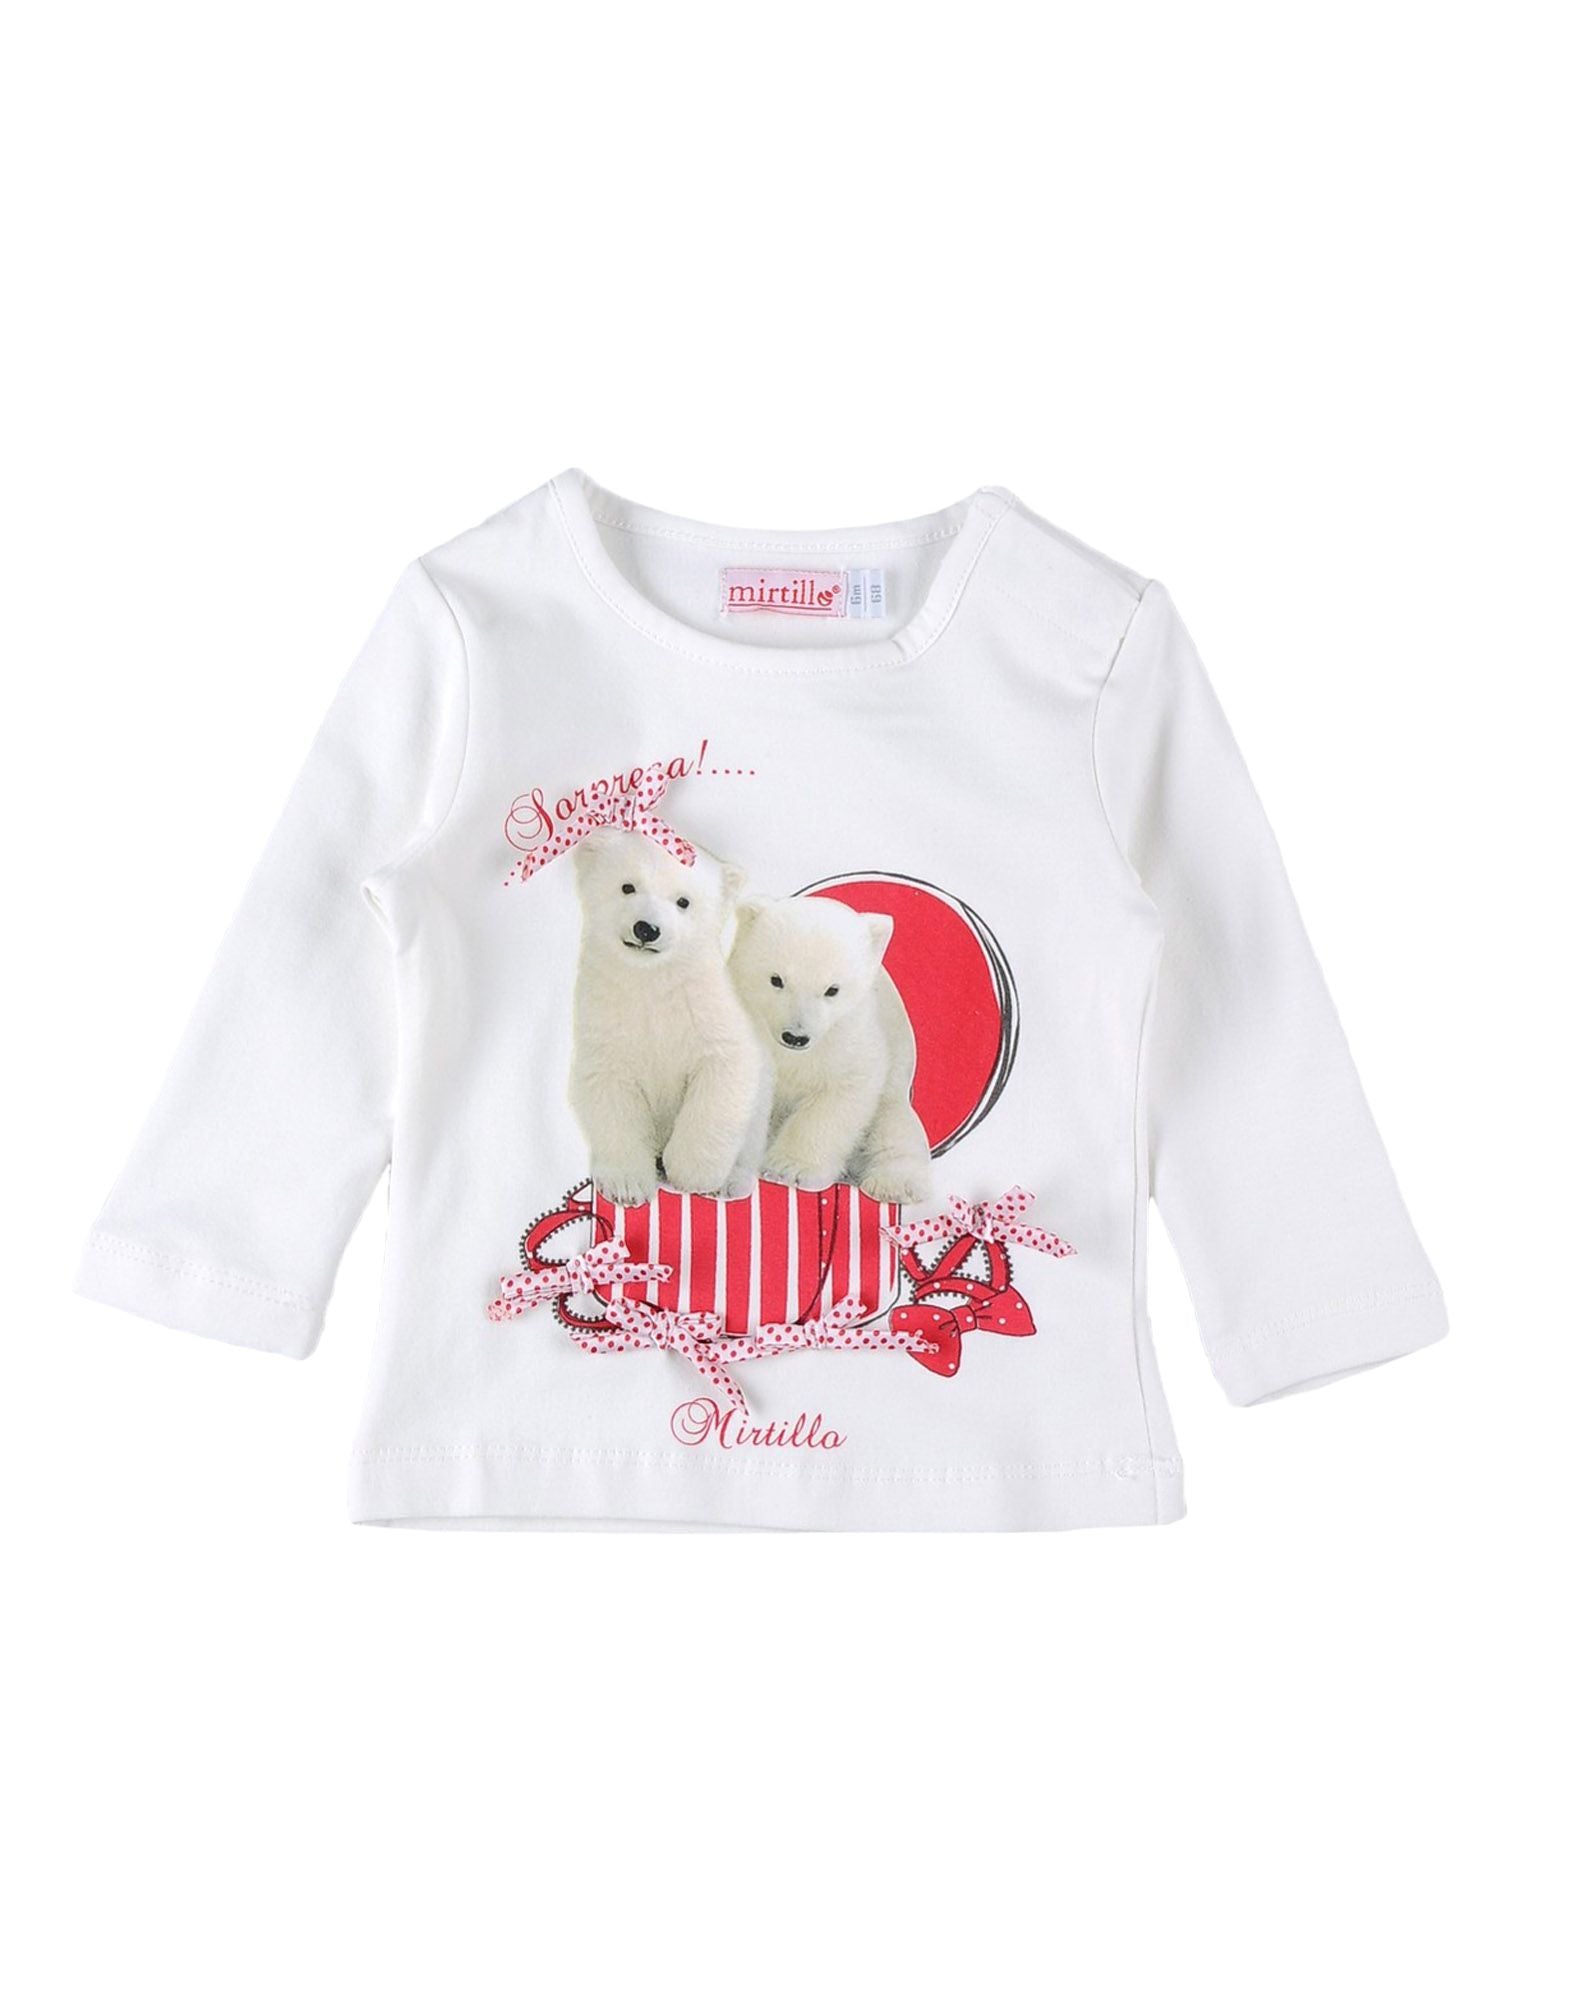 
  Long-sleeved T-shirt from the Mirtillo girl's clothing line, with button placket
  on the shou...